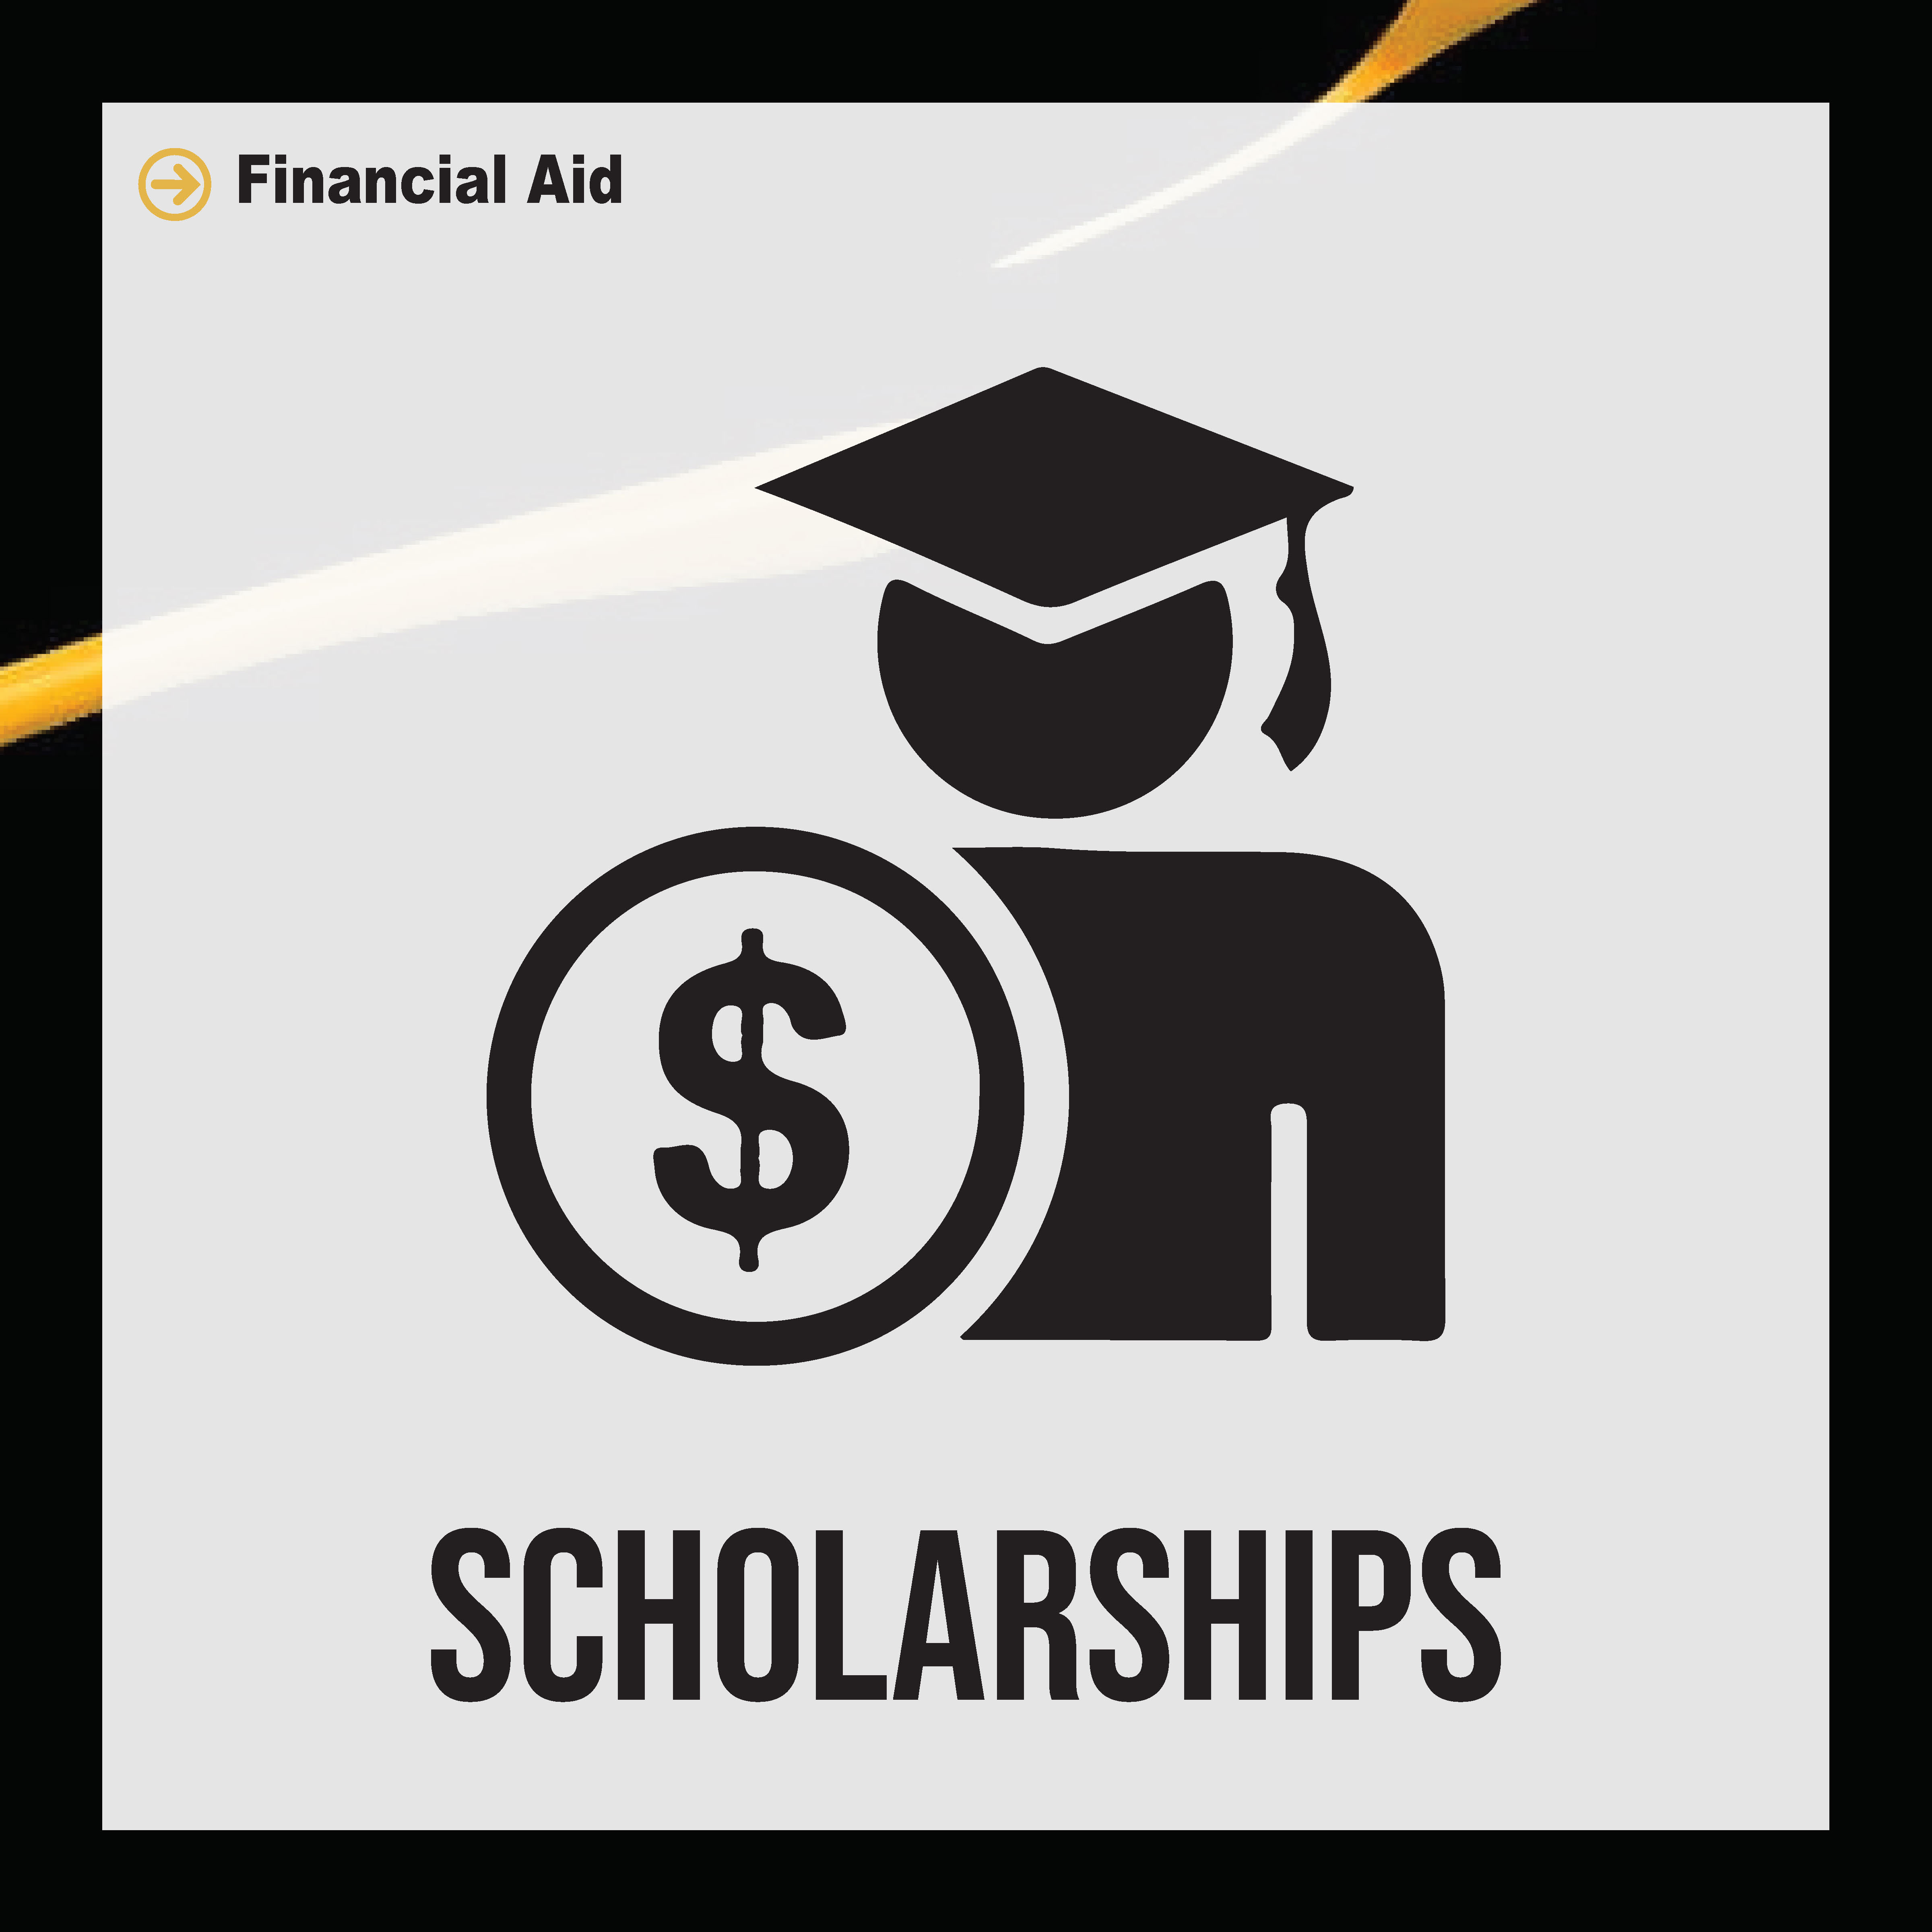 Scholarships with image of student in grad cap